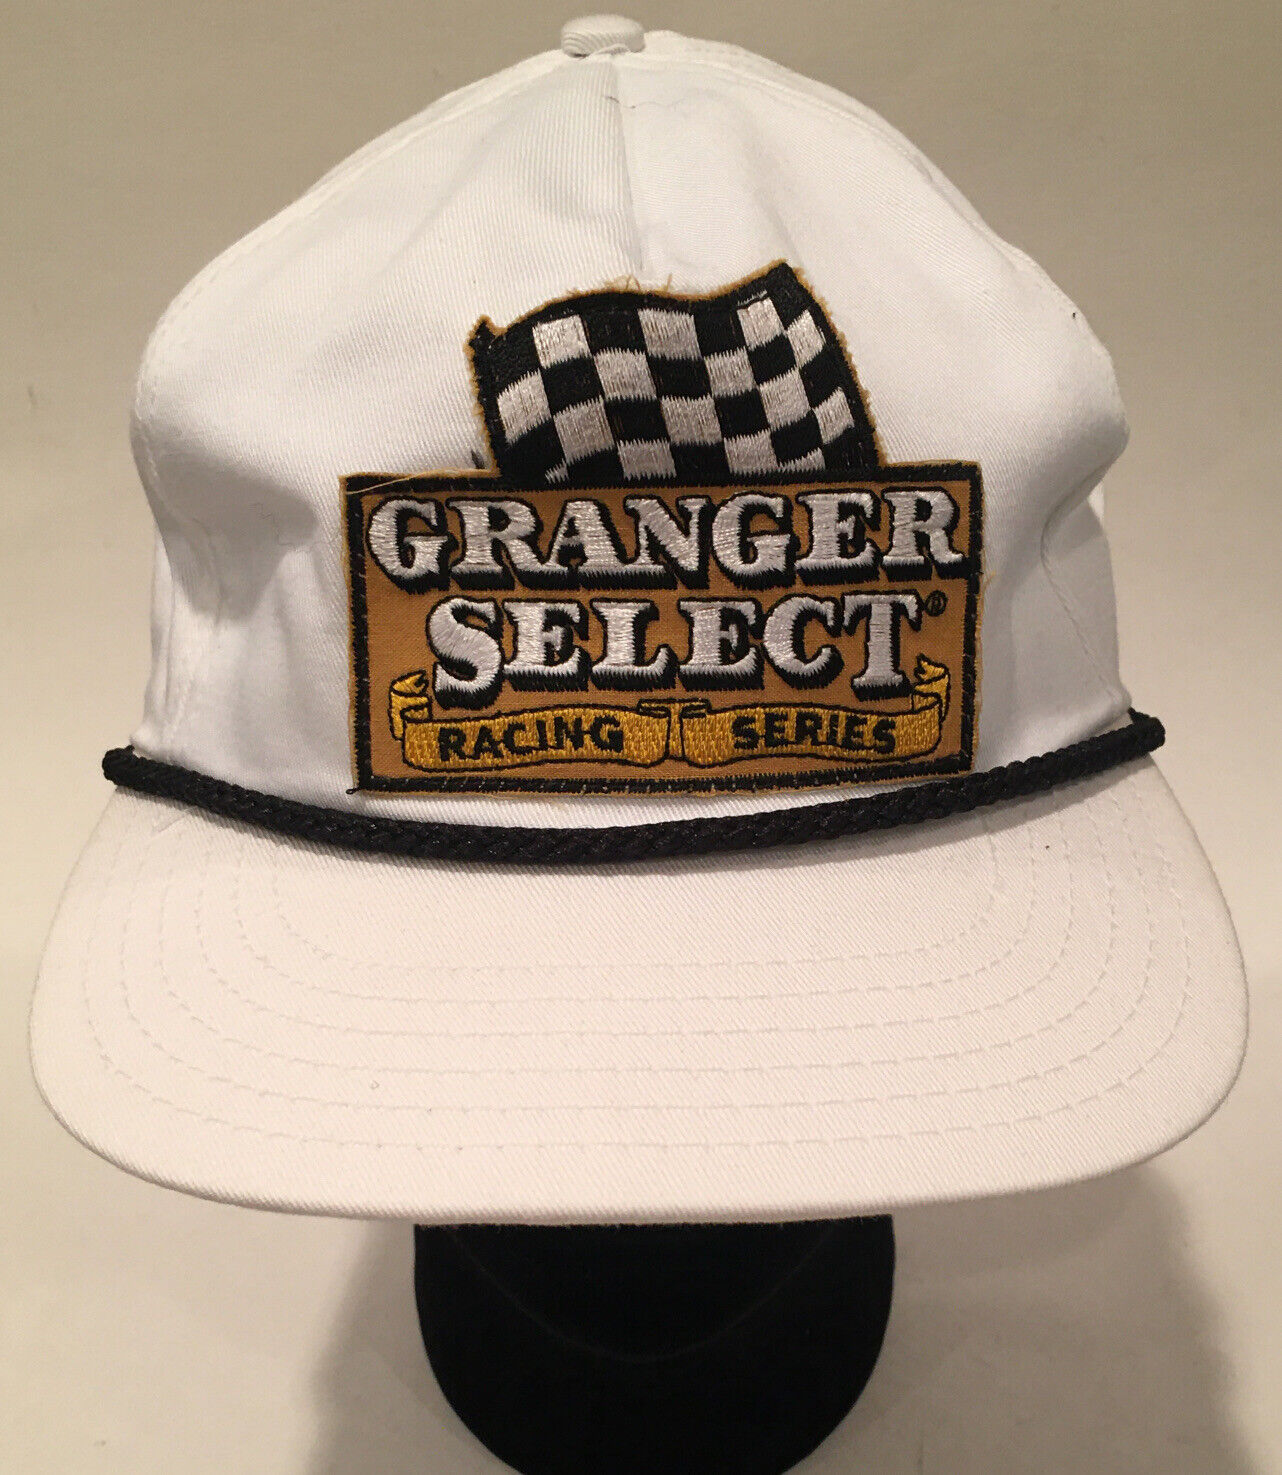 Vintage Granger Selects Racing Series Patch White Snapback Hat Tobacco Rope Cap